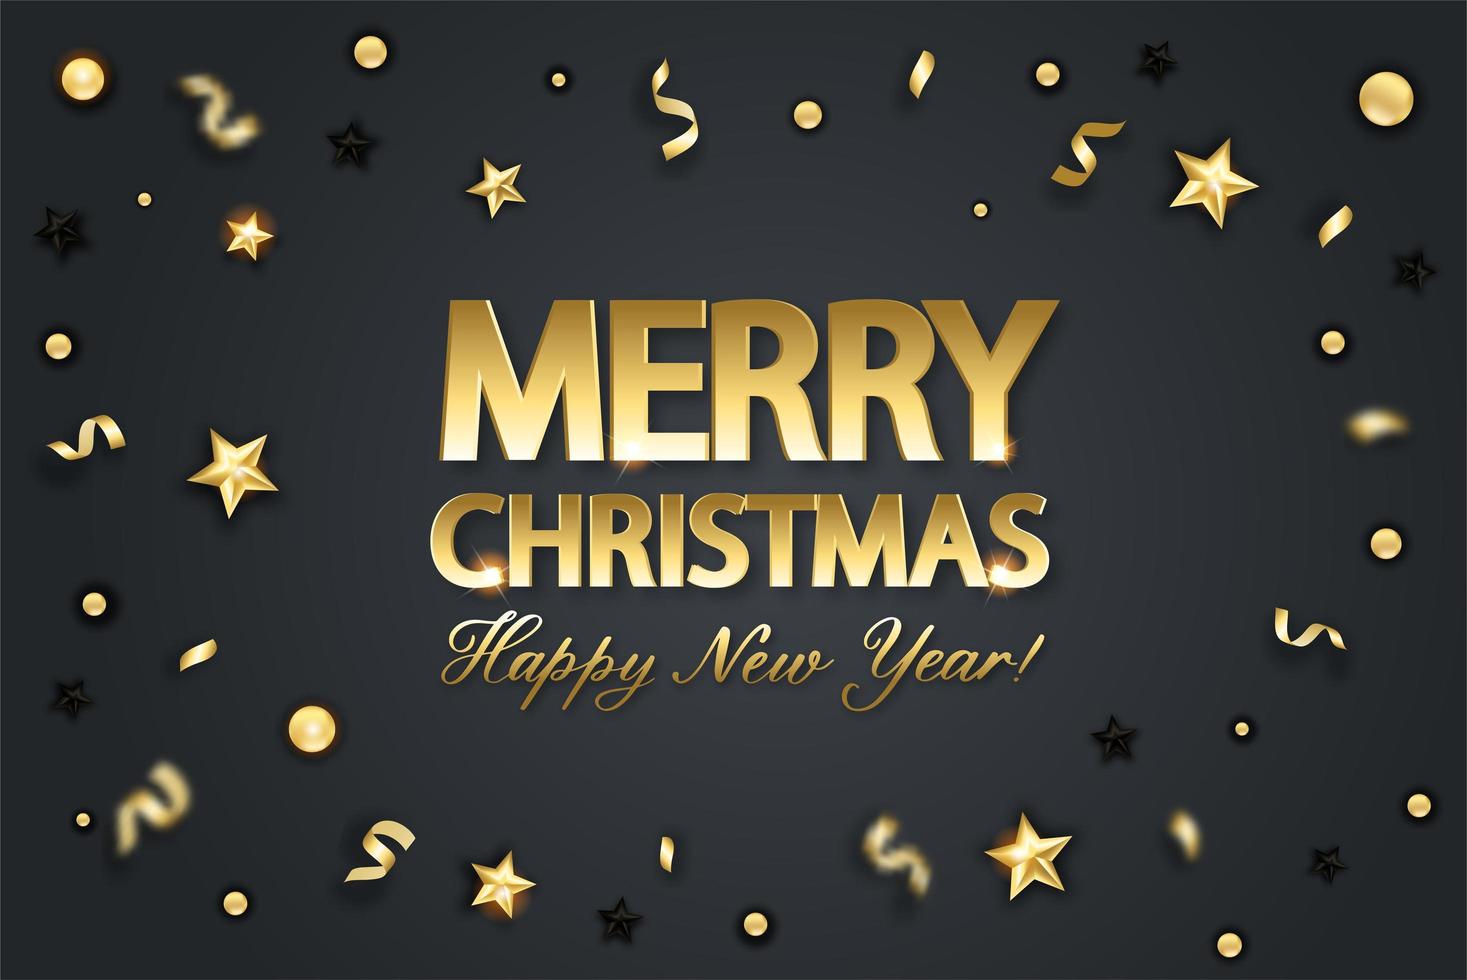 Christmas background with shining gold star and confetti. Merry Christmas card illustration on black background. vector